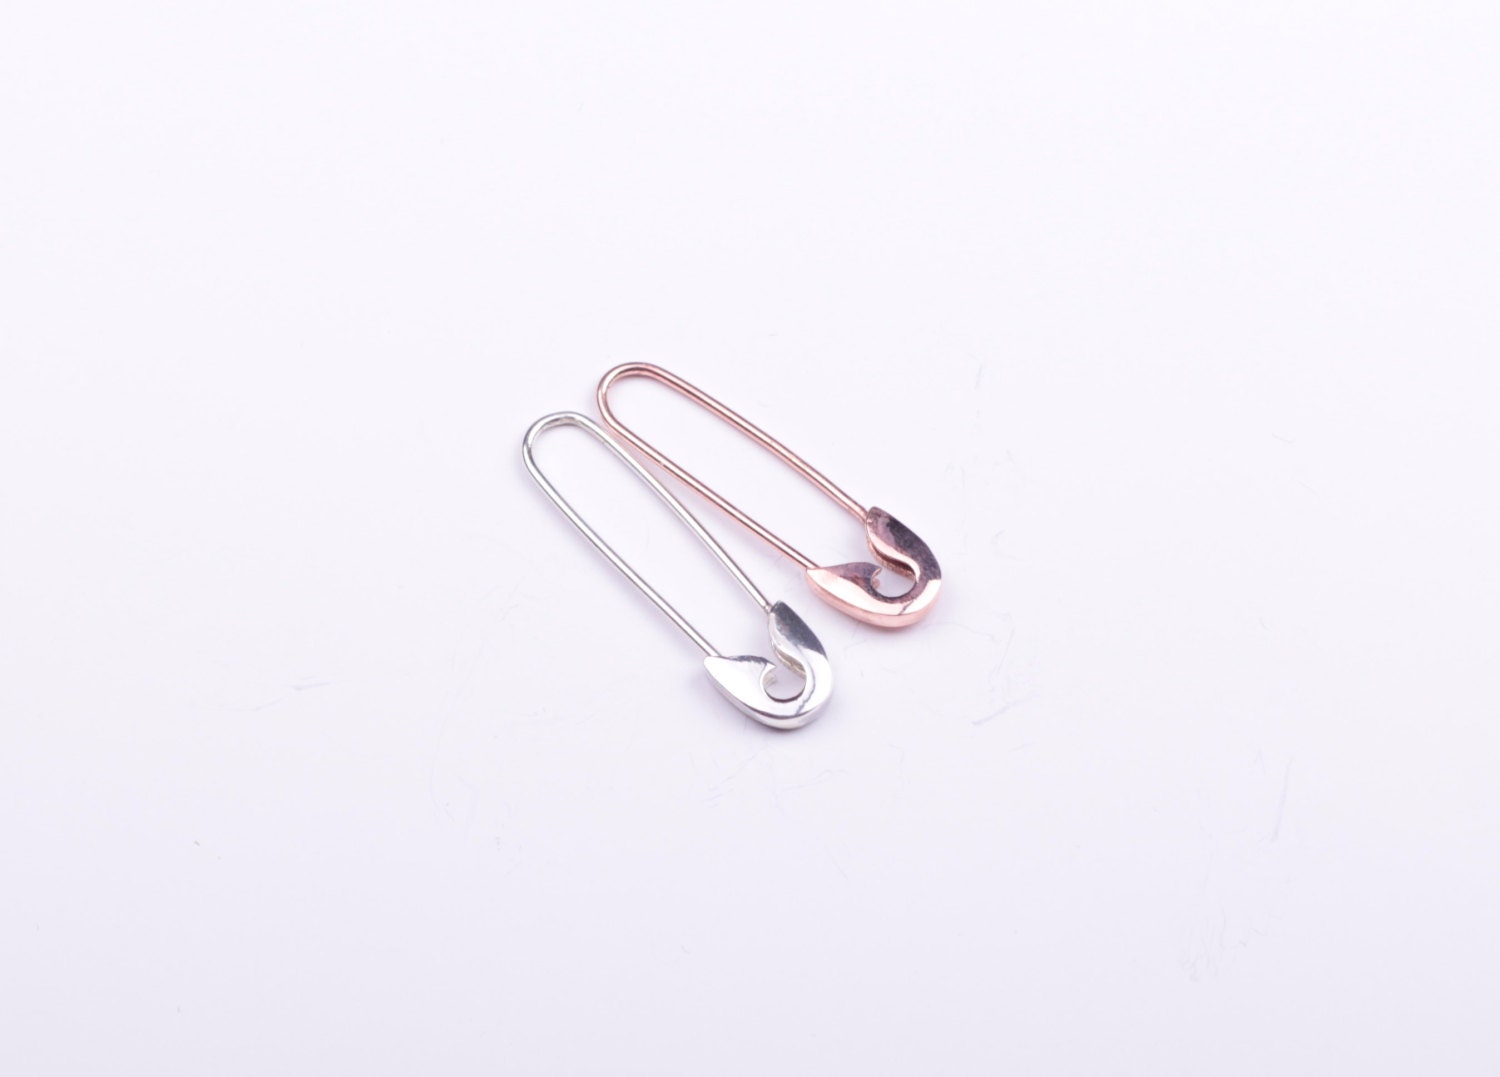 safety pin earrings